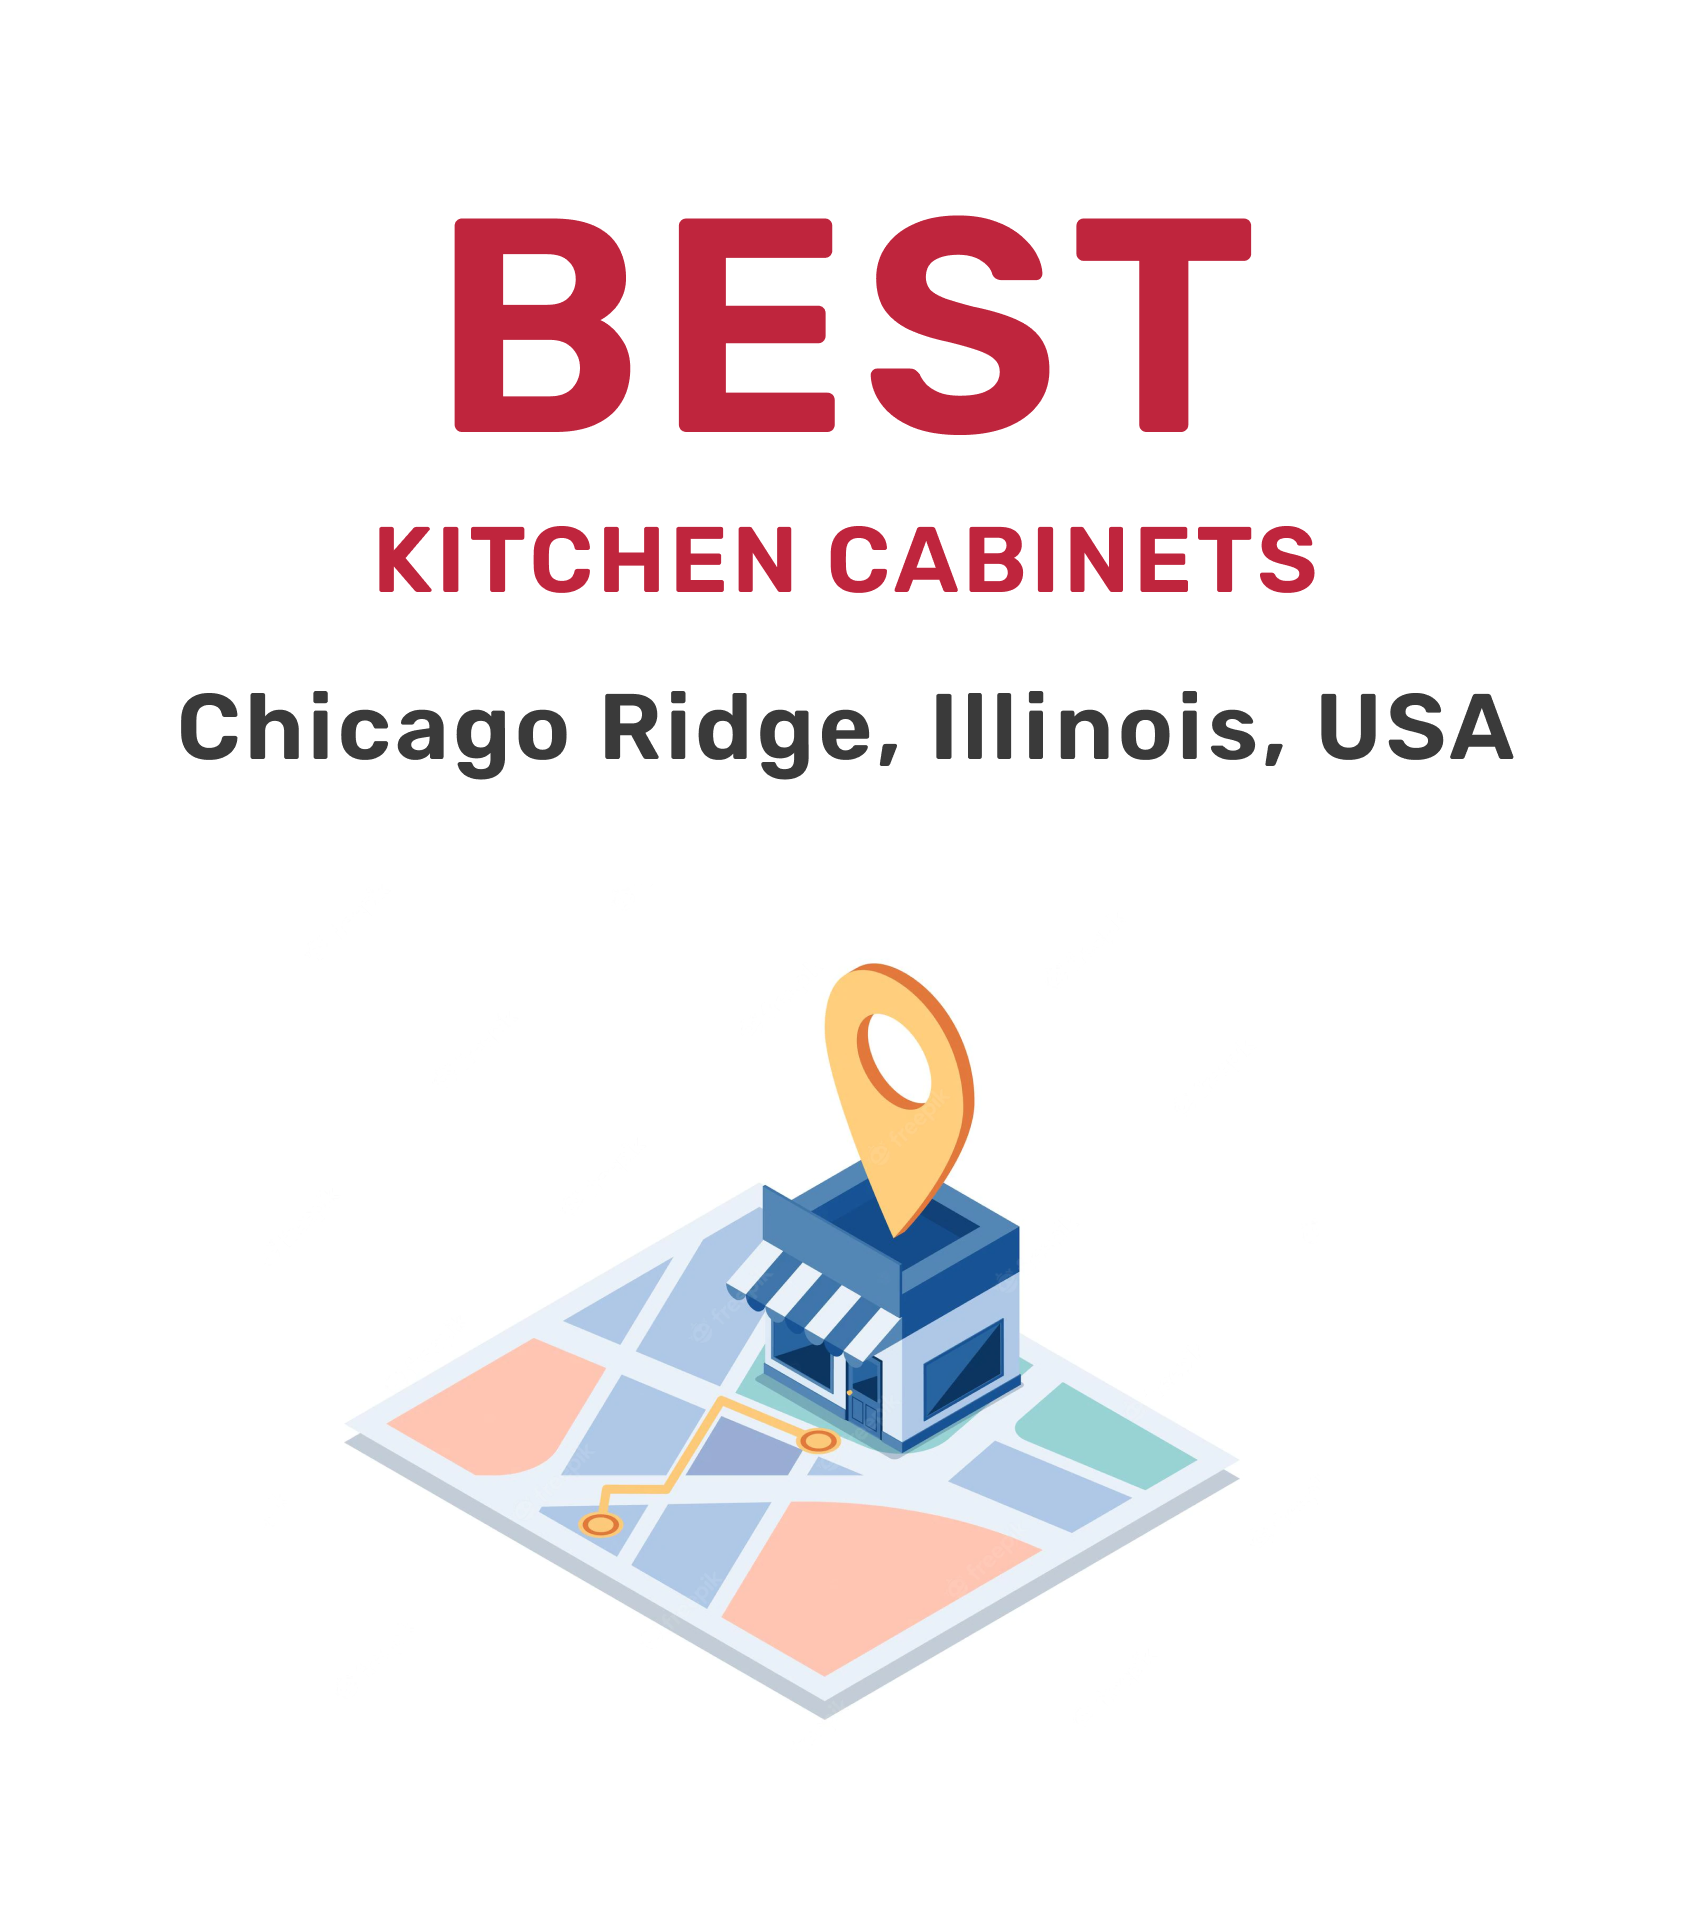 A photo of a kitchen in Chicago Ridge, Illinois, as seen on Google Maps.